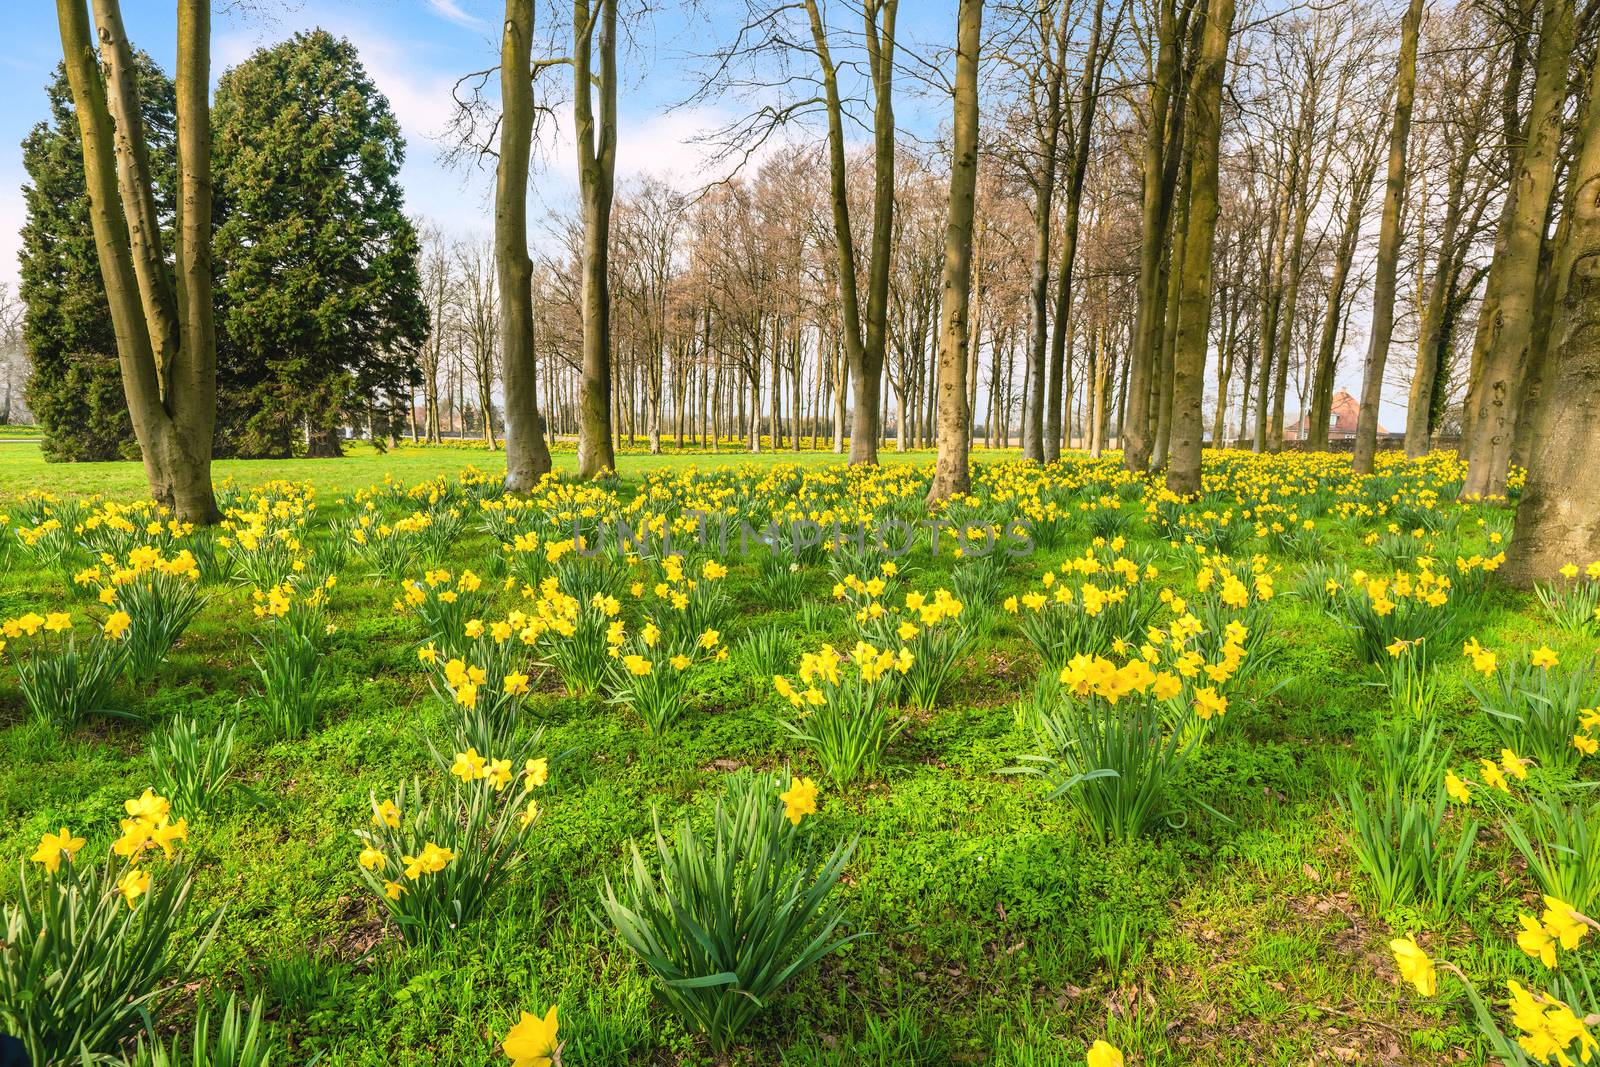 Park filled with yellow daffodils in the spring blooming in the early sun